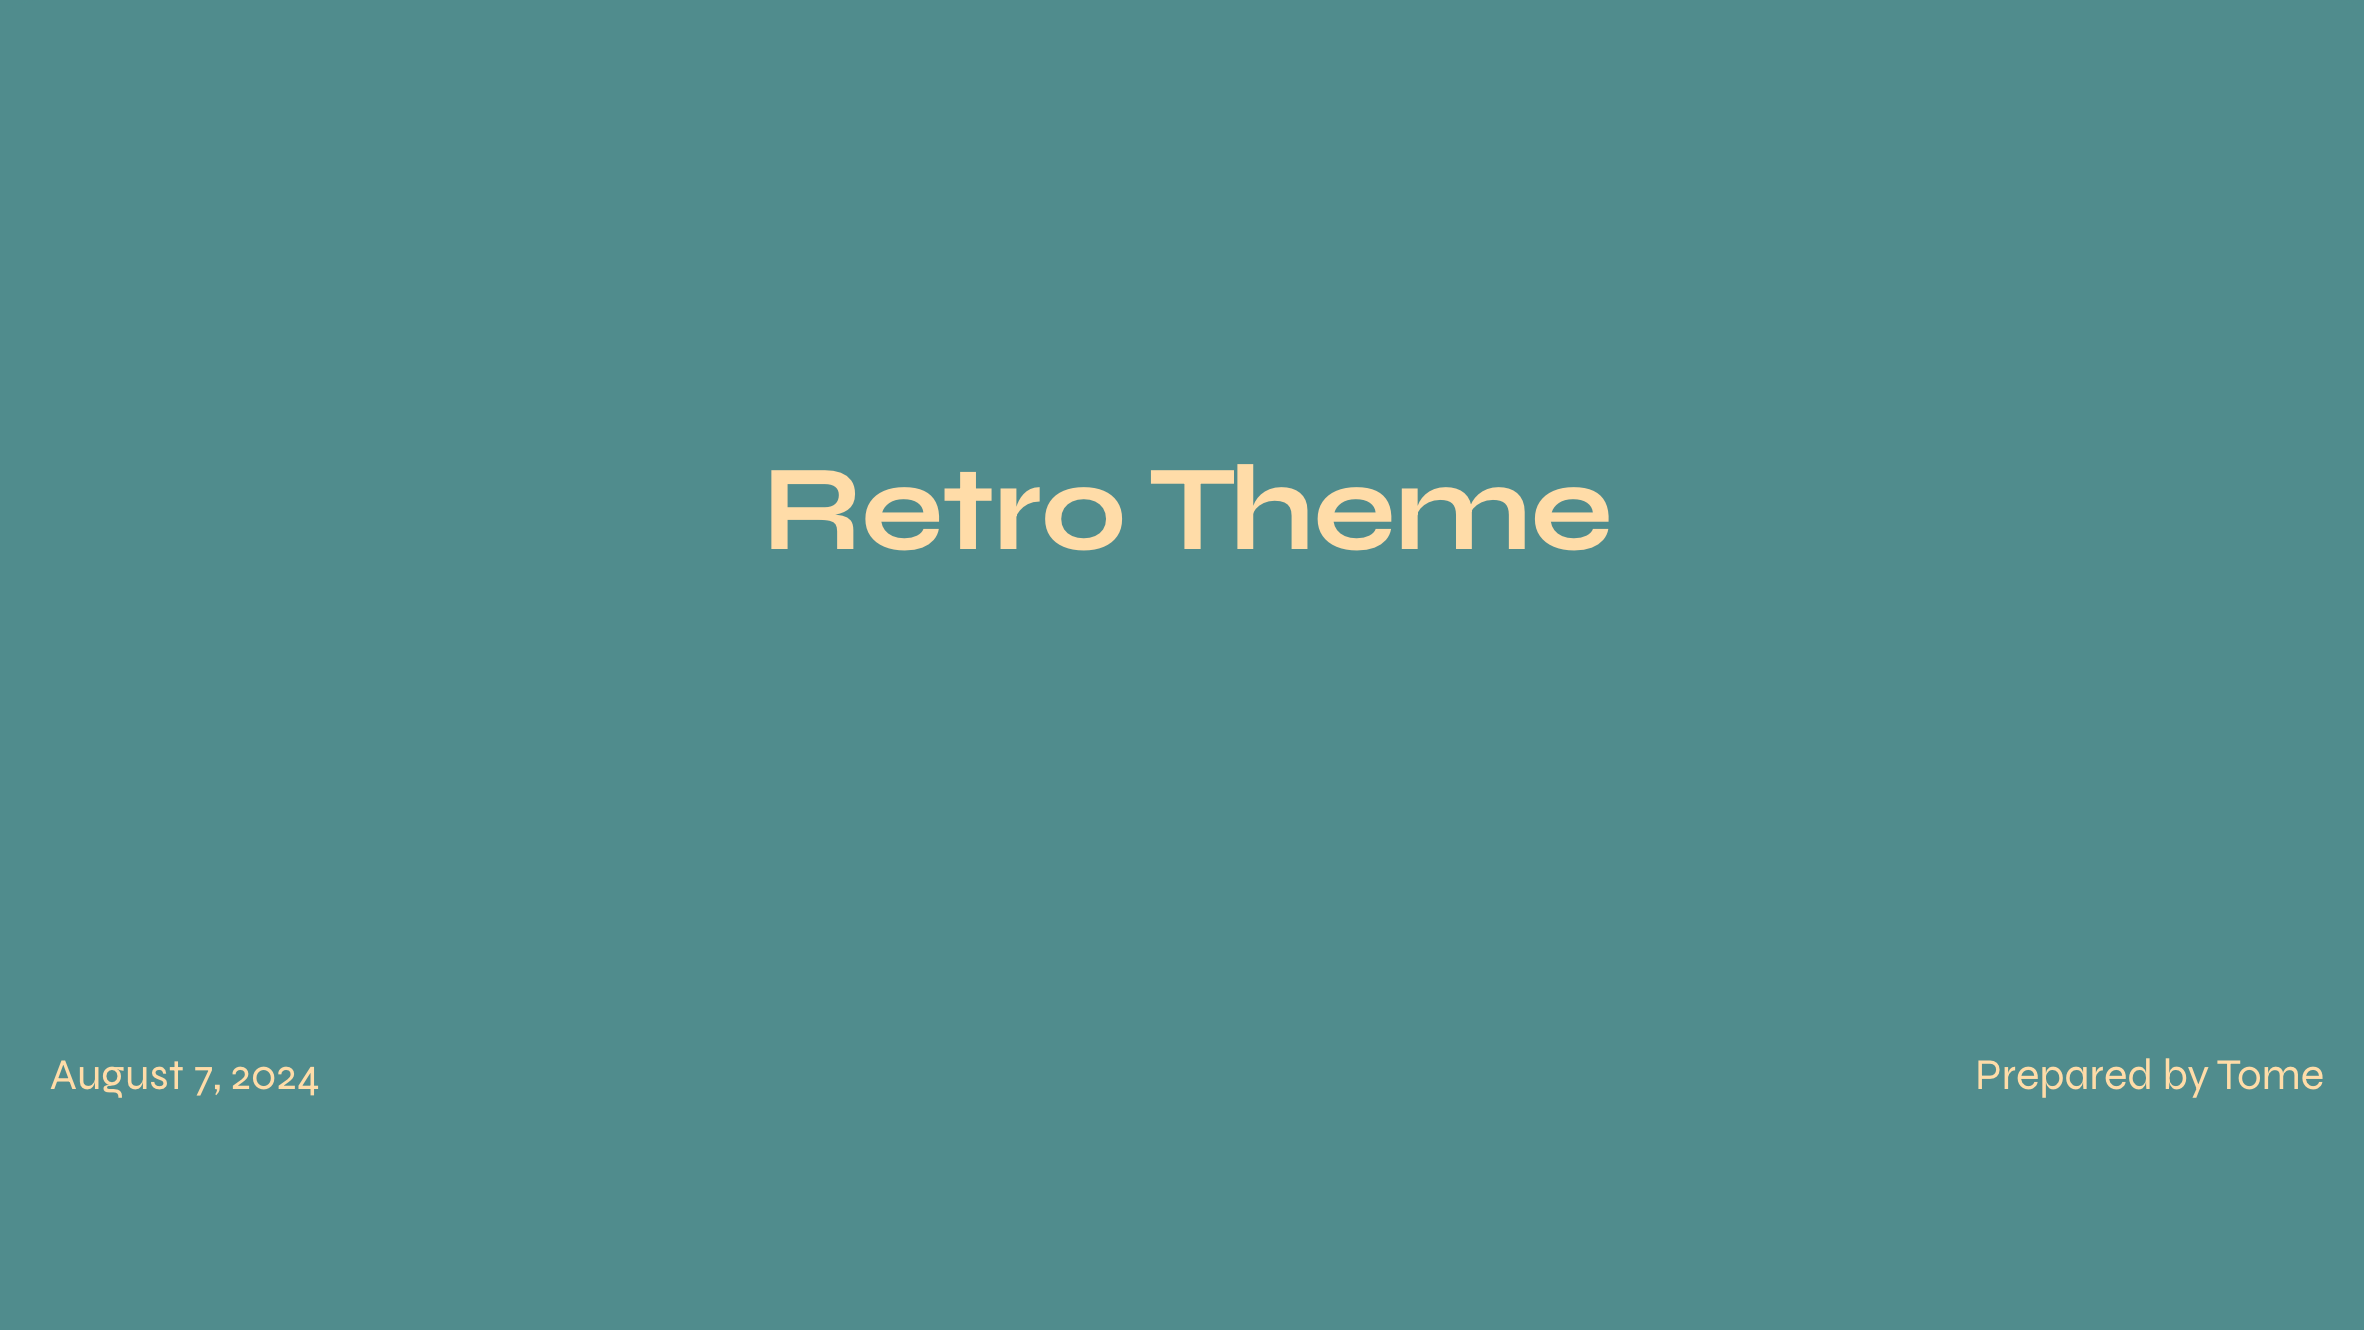 Retro Theme Template - Text With Images